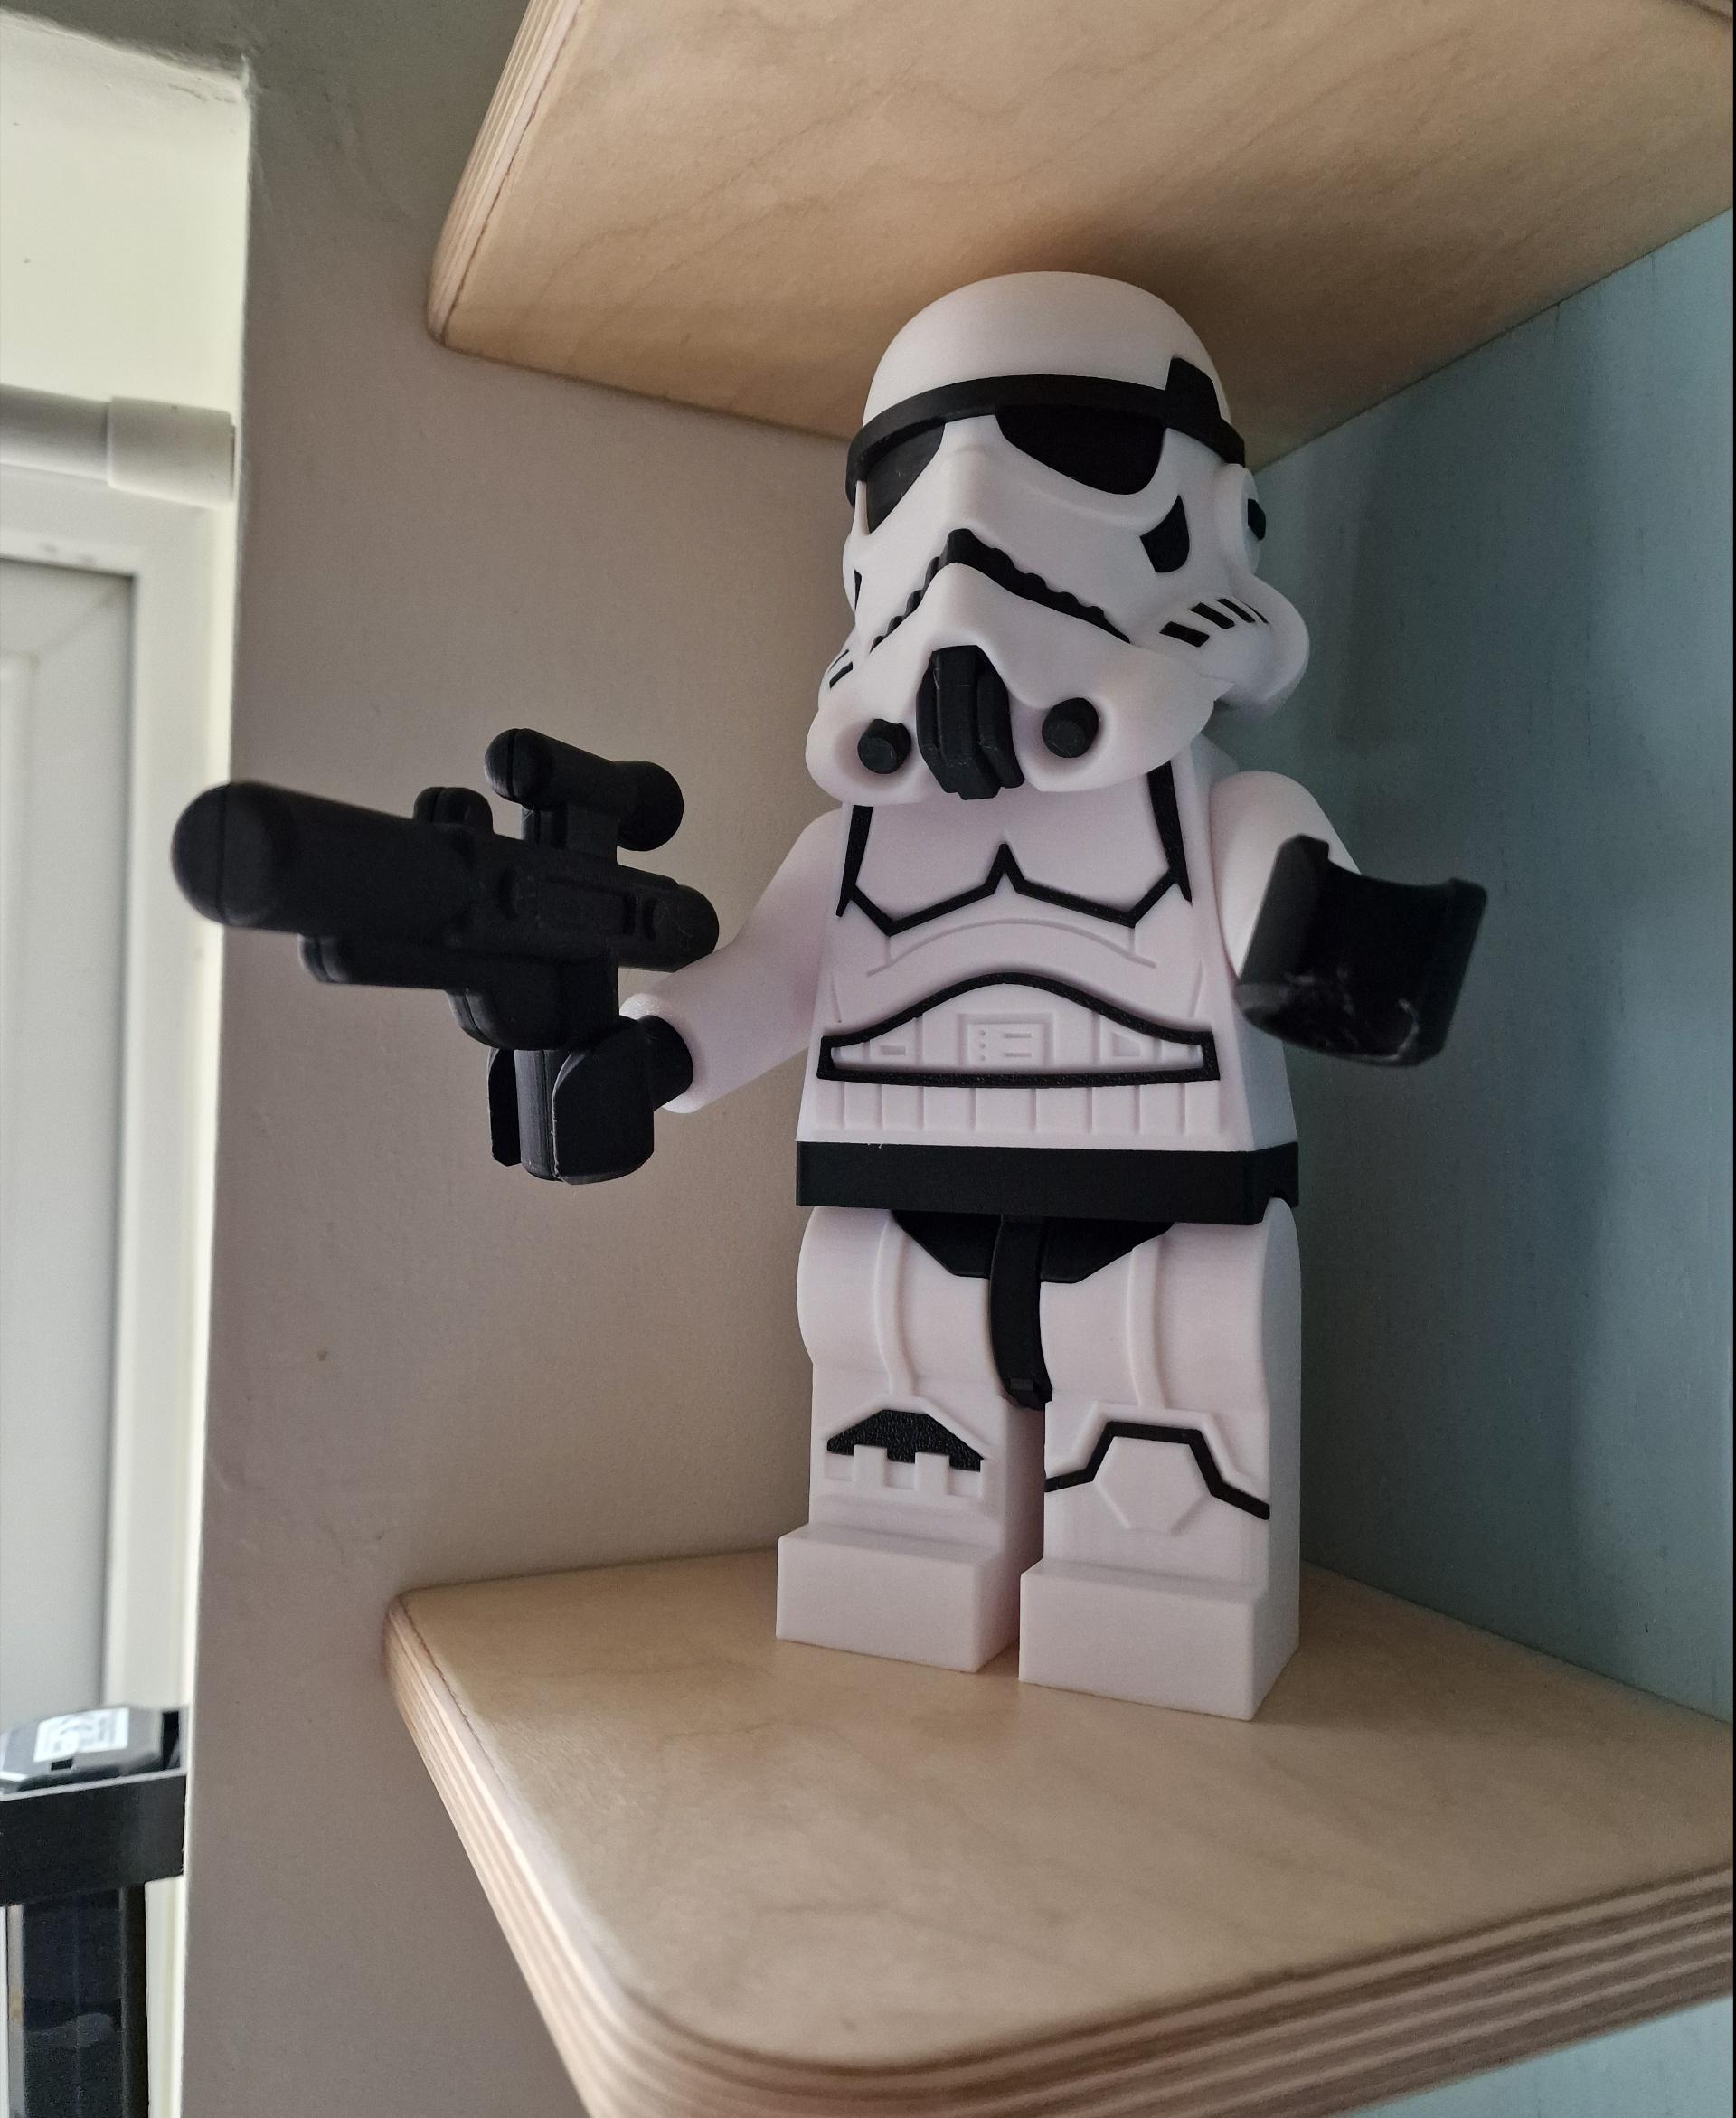 Stormtrooper (6:1 LEGO-inspired brick figure, NO MMU/AMS, NO supports, NO glue) - Printed with a 0.4 nozzle at 0.08 layer height for the nice contours and minimal stair stepping. A great model and demo of dimensional accuracy and great part design.

Done in Sunlu PLA+ black and white. - 3d model